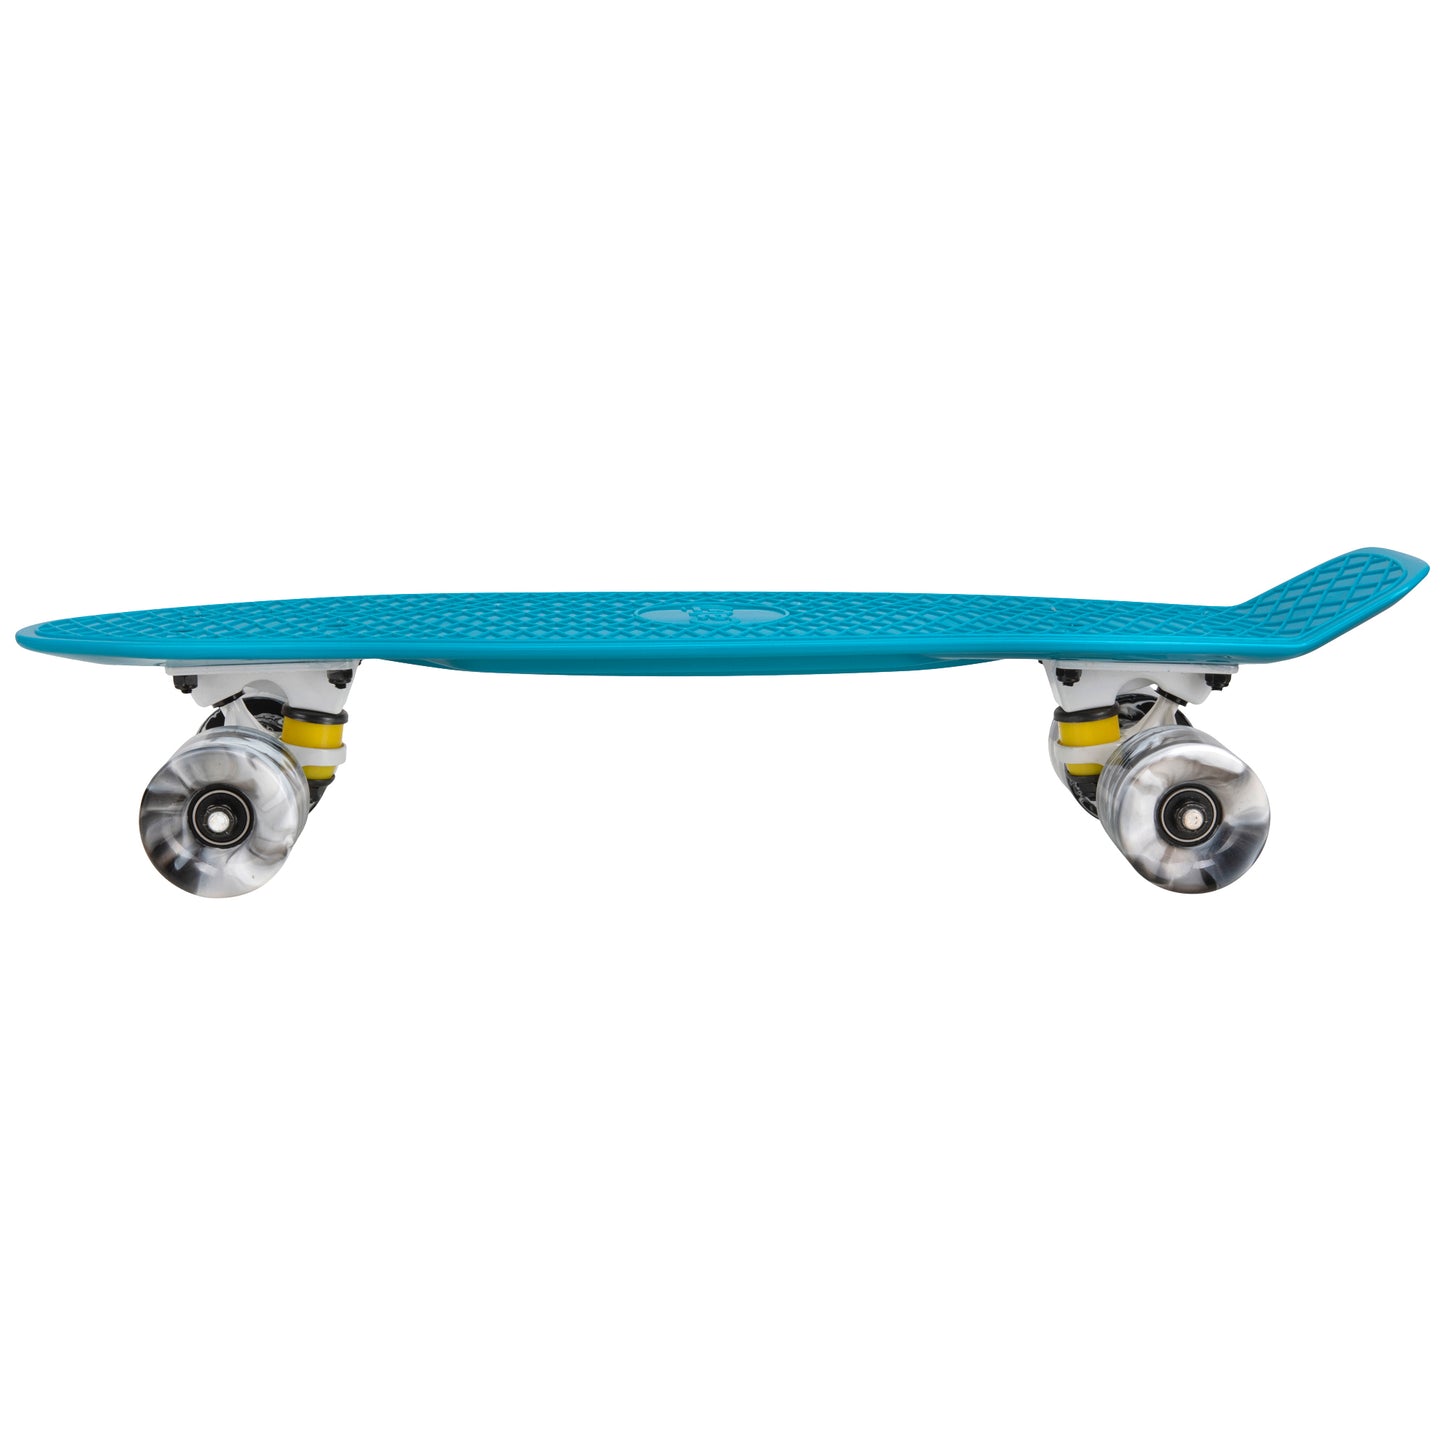 Cal 7 Oceanic 22.5” Mini Cruiser with Swirl Wheels -featuring a muted blue plastic deck, 78A black and white wheels. 